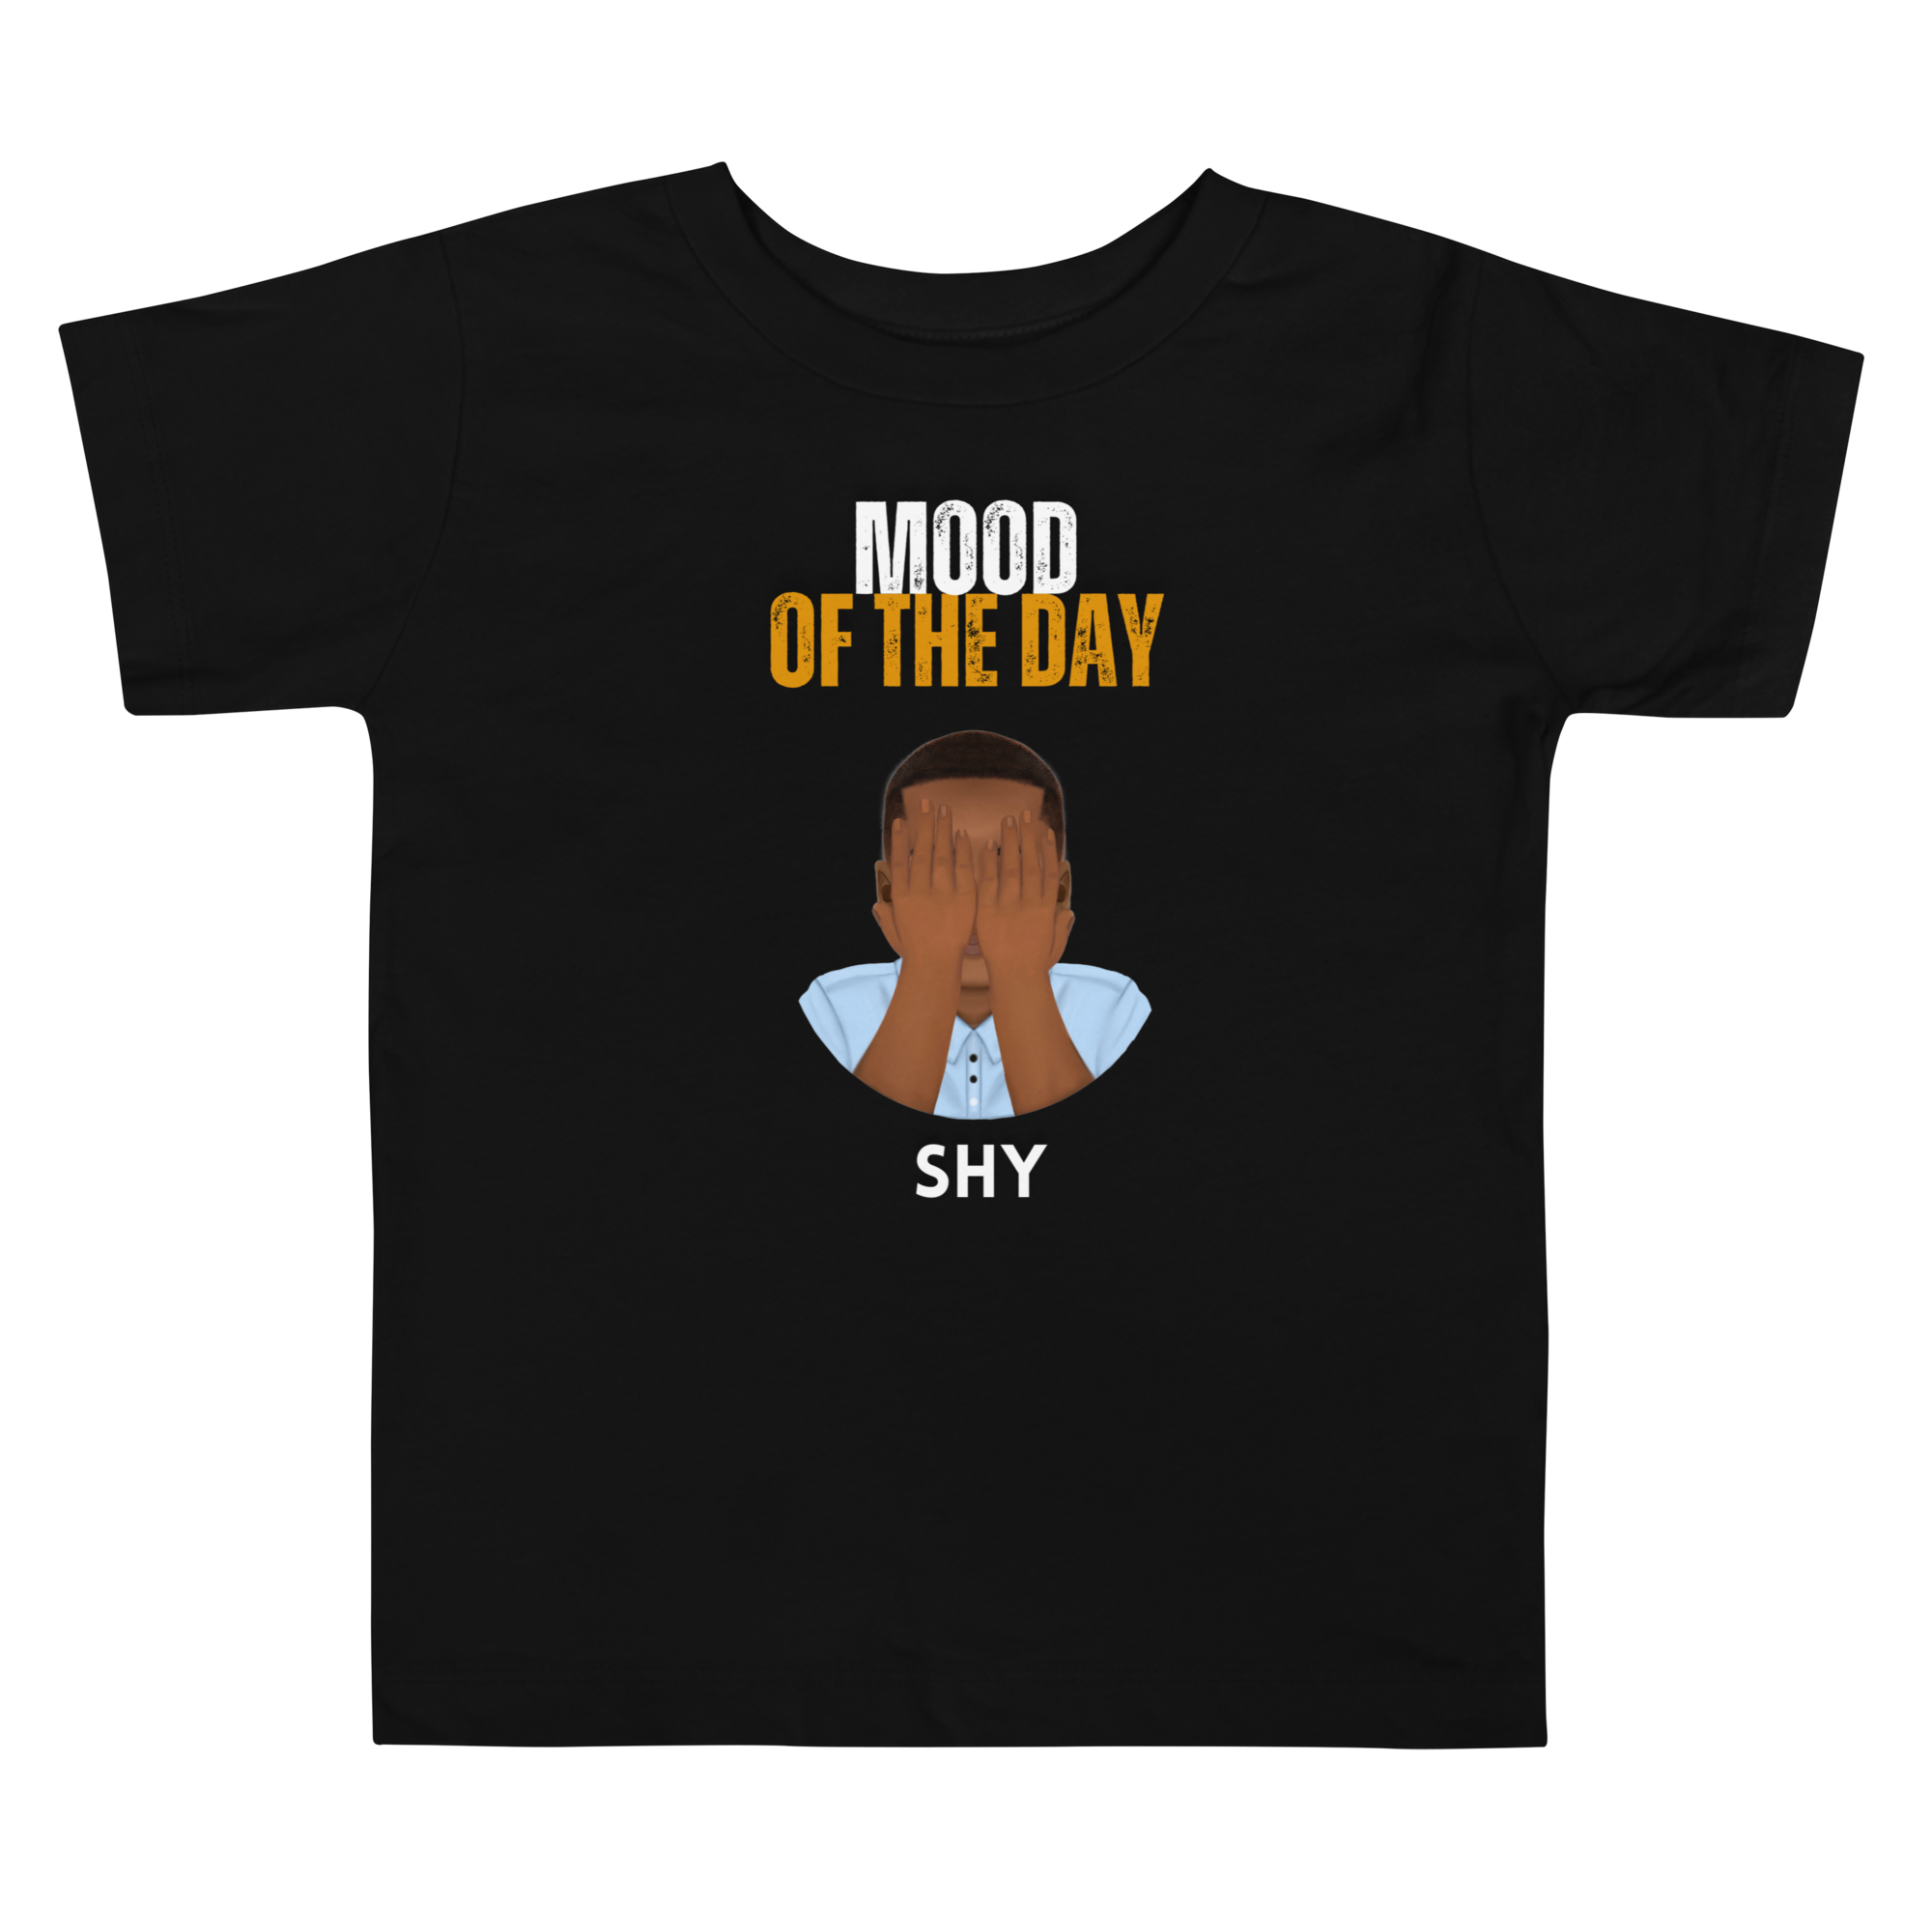 Toddler Mood of the Day T-shirt - Shy Boy